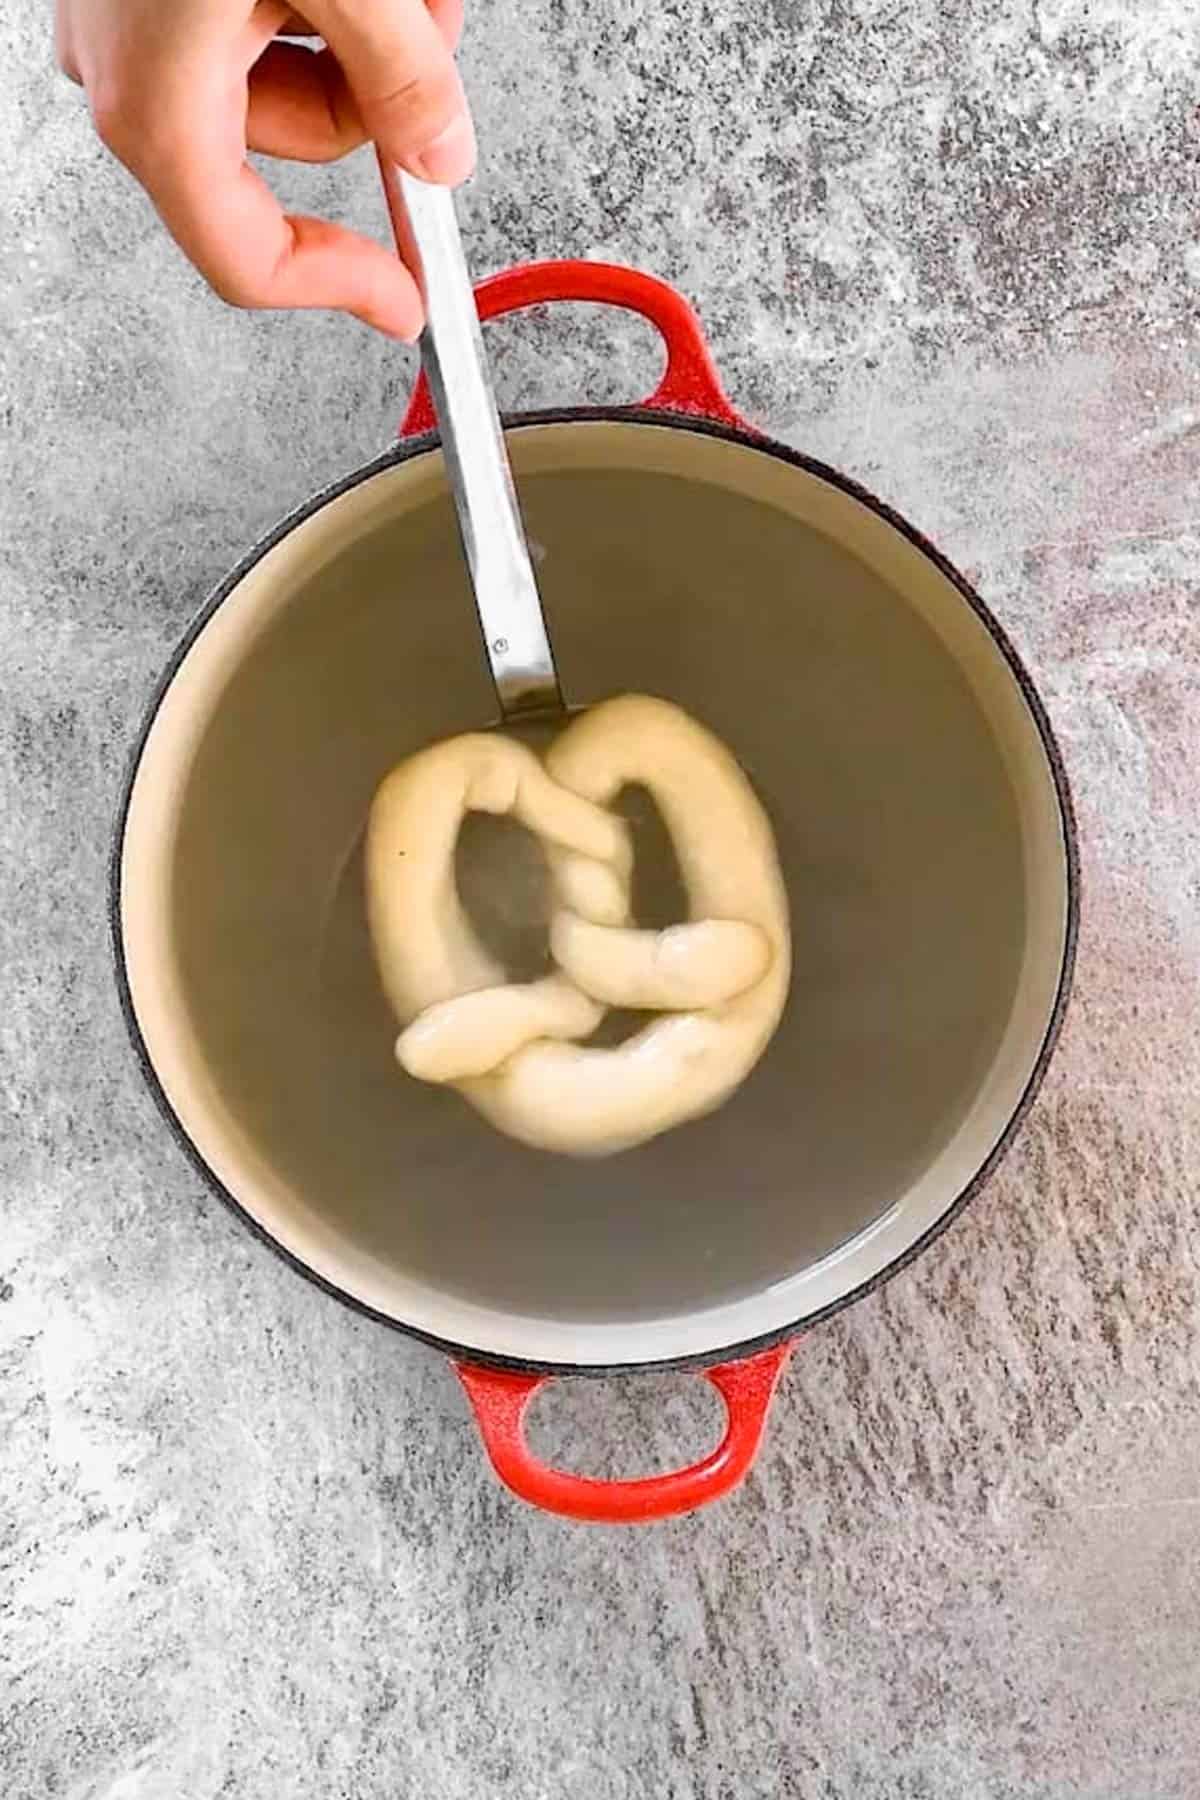 dipping unbaked pretzel in a pot of brine